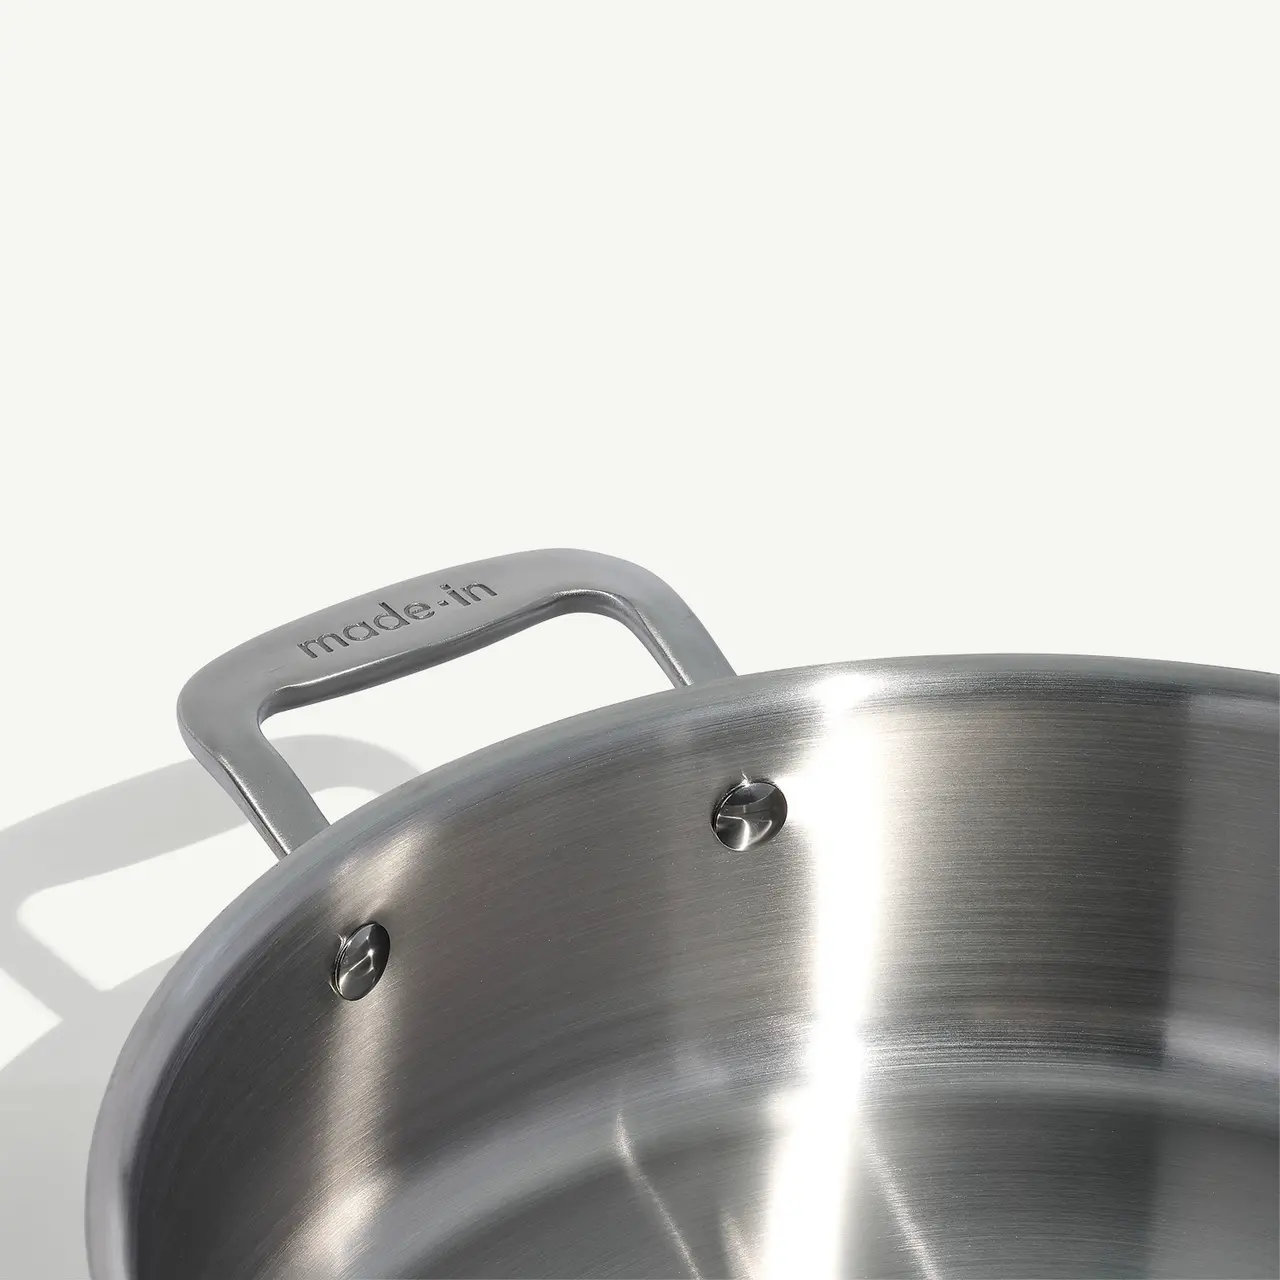 A close-up view of a stainless steel pot with a "made in" engraving on its handle, highlighting its sturdy design and material.